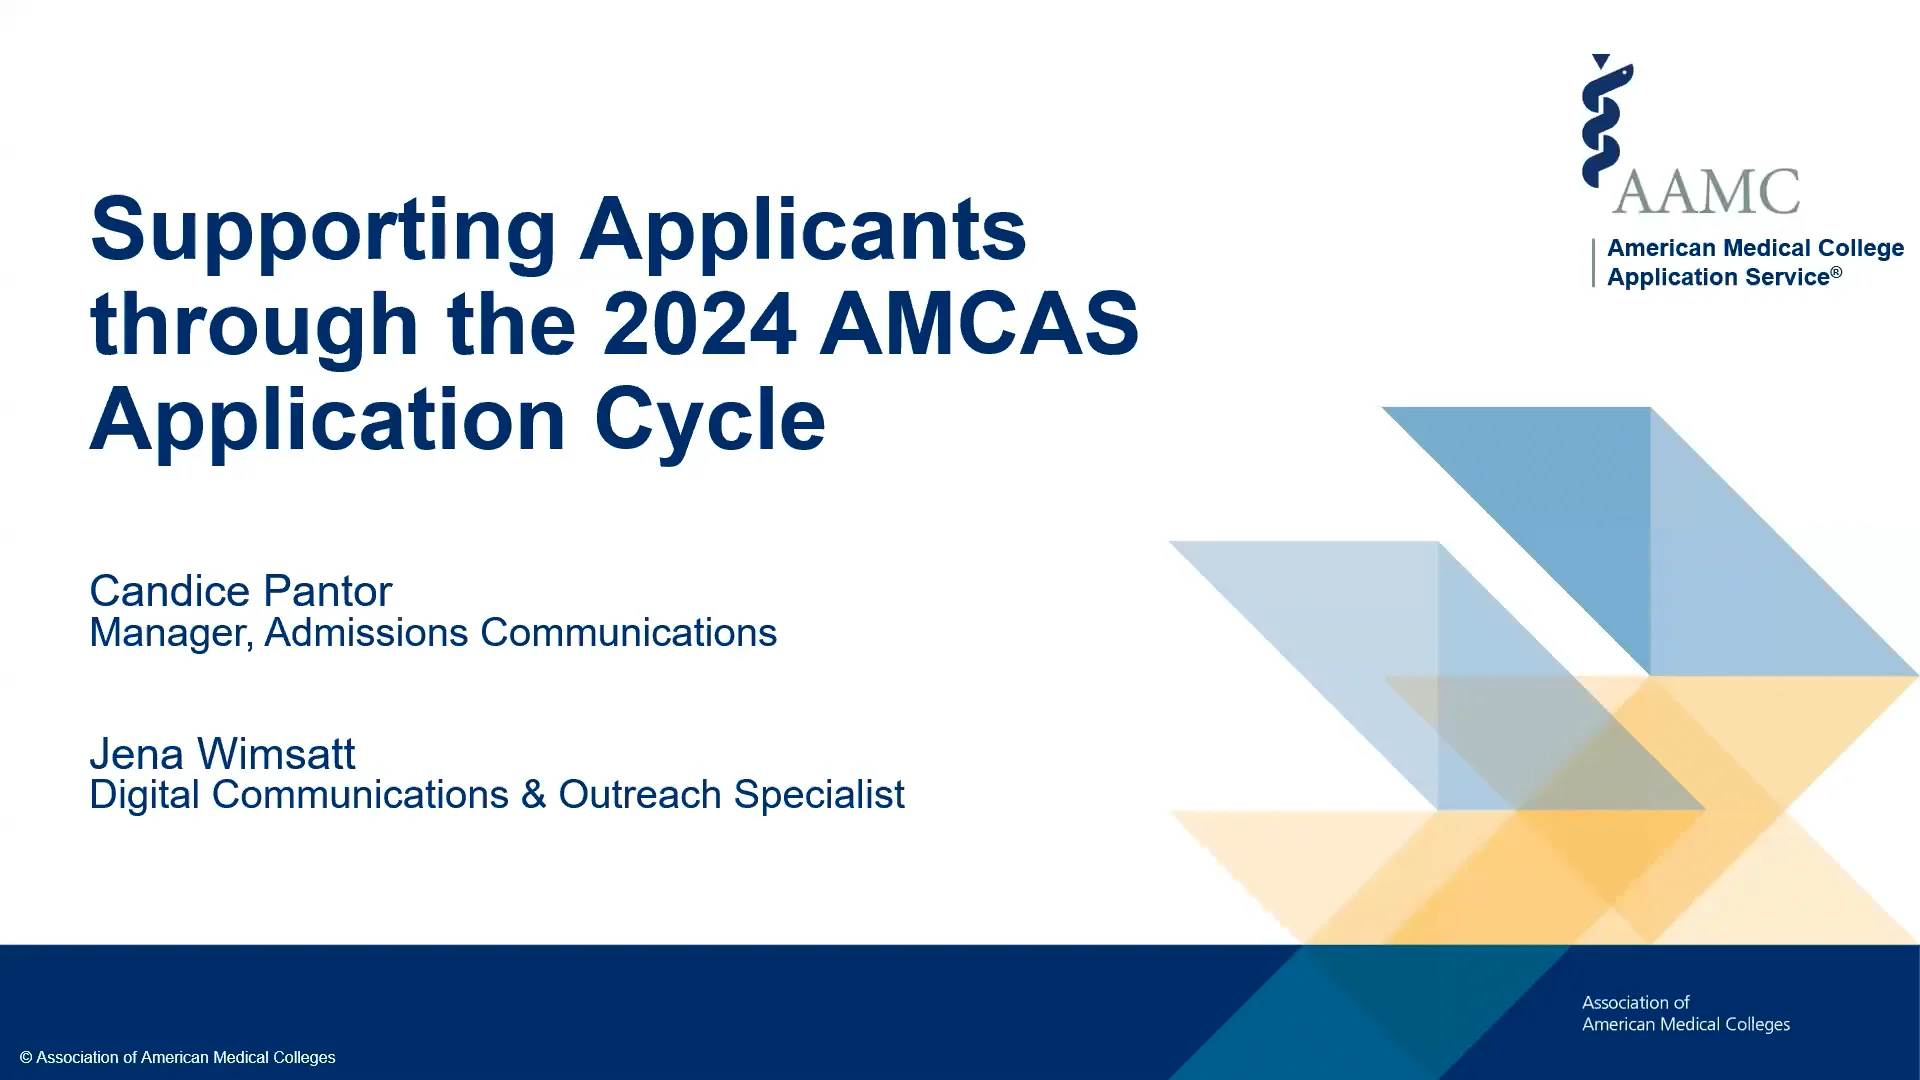 Supporting Applicants through the 2024 AMCAS Application Cycle on Vimeo